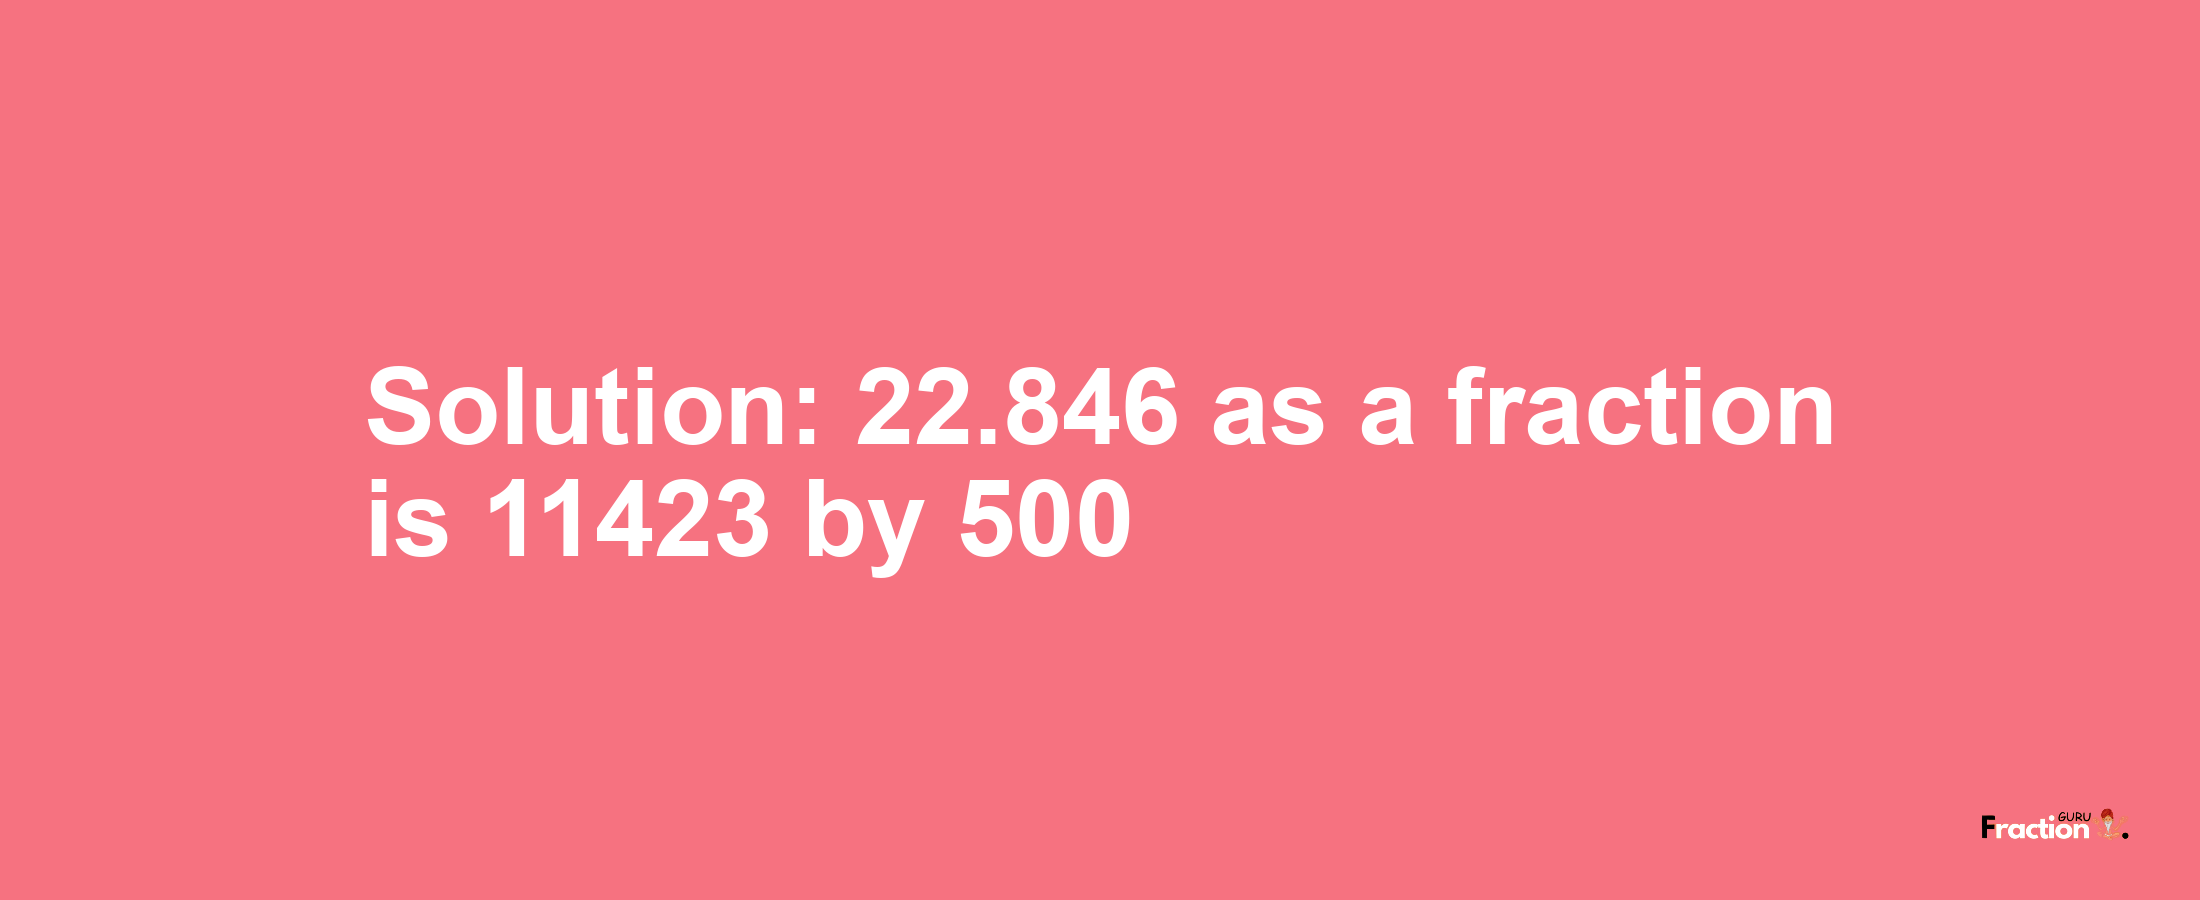 Solution:22.846 as a fraction is 11423/500